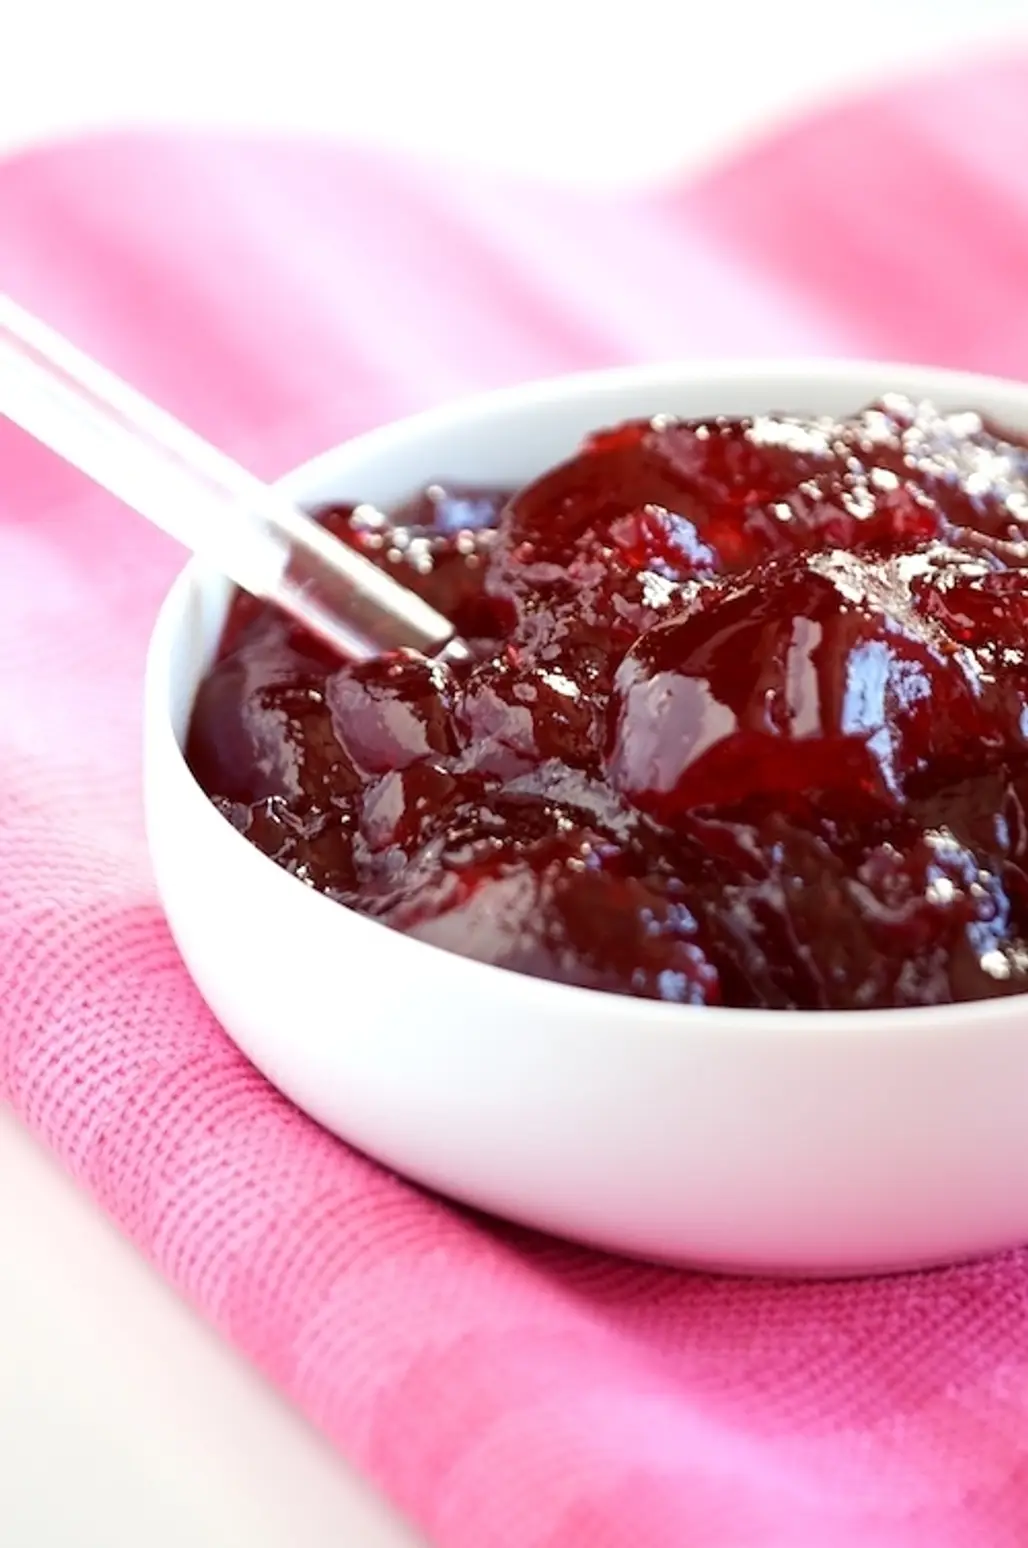 Whip up Some Jelly